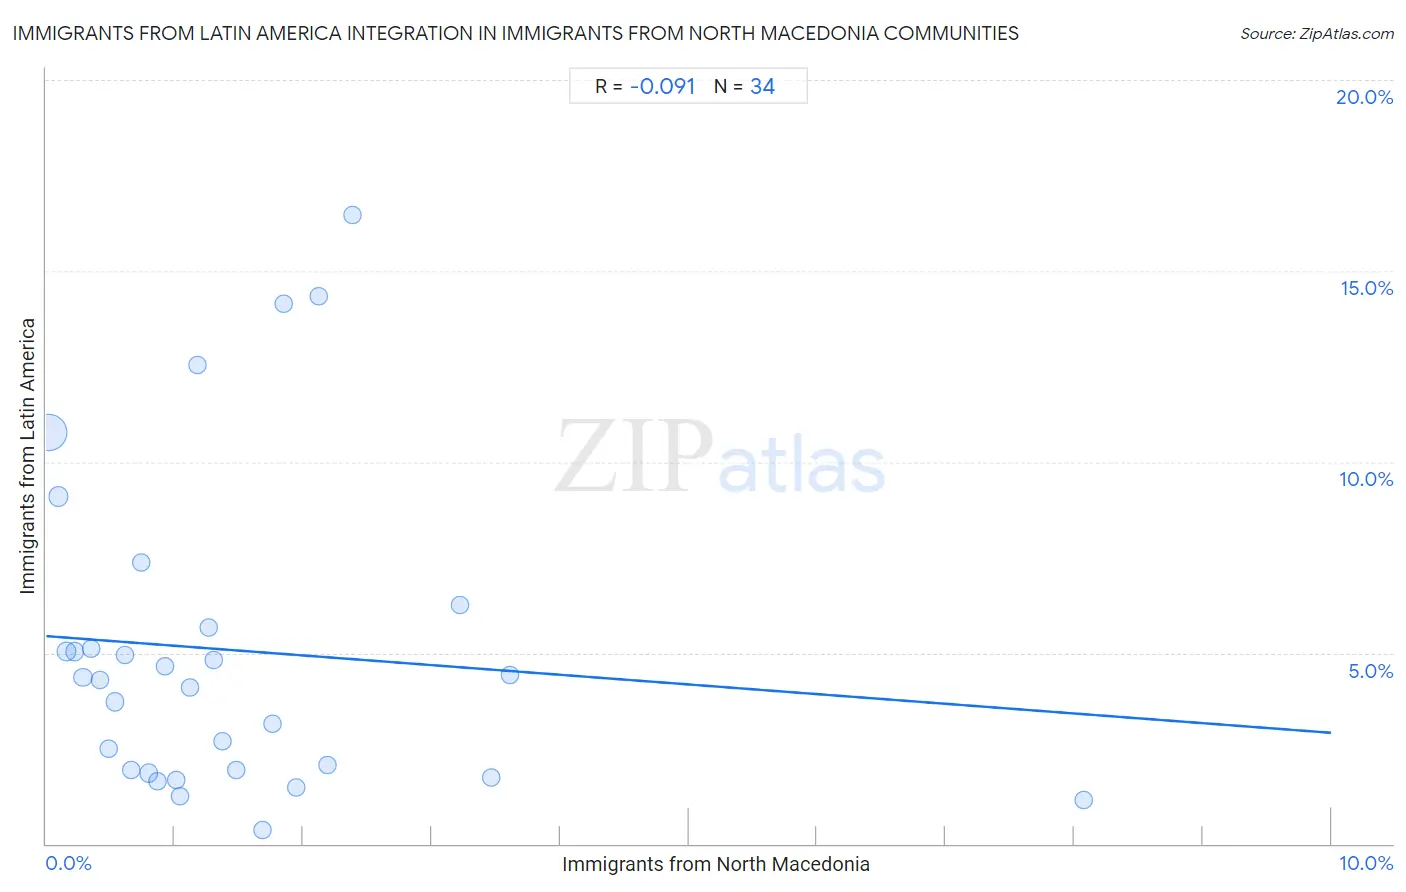 Immigrants from North Macedonia Integration in Immigrants from Latin America Communities